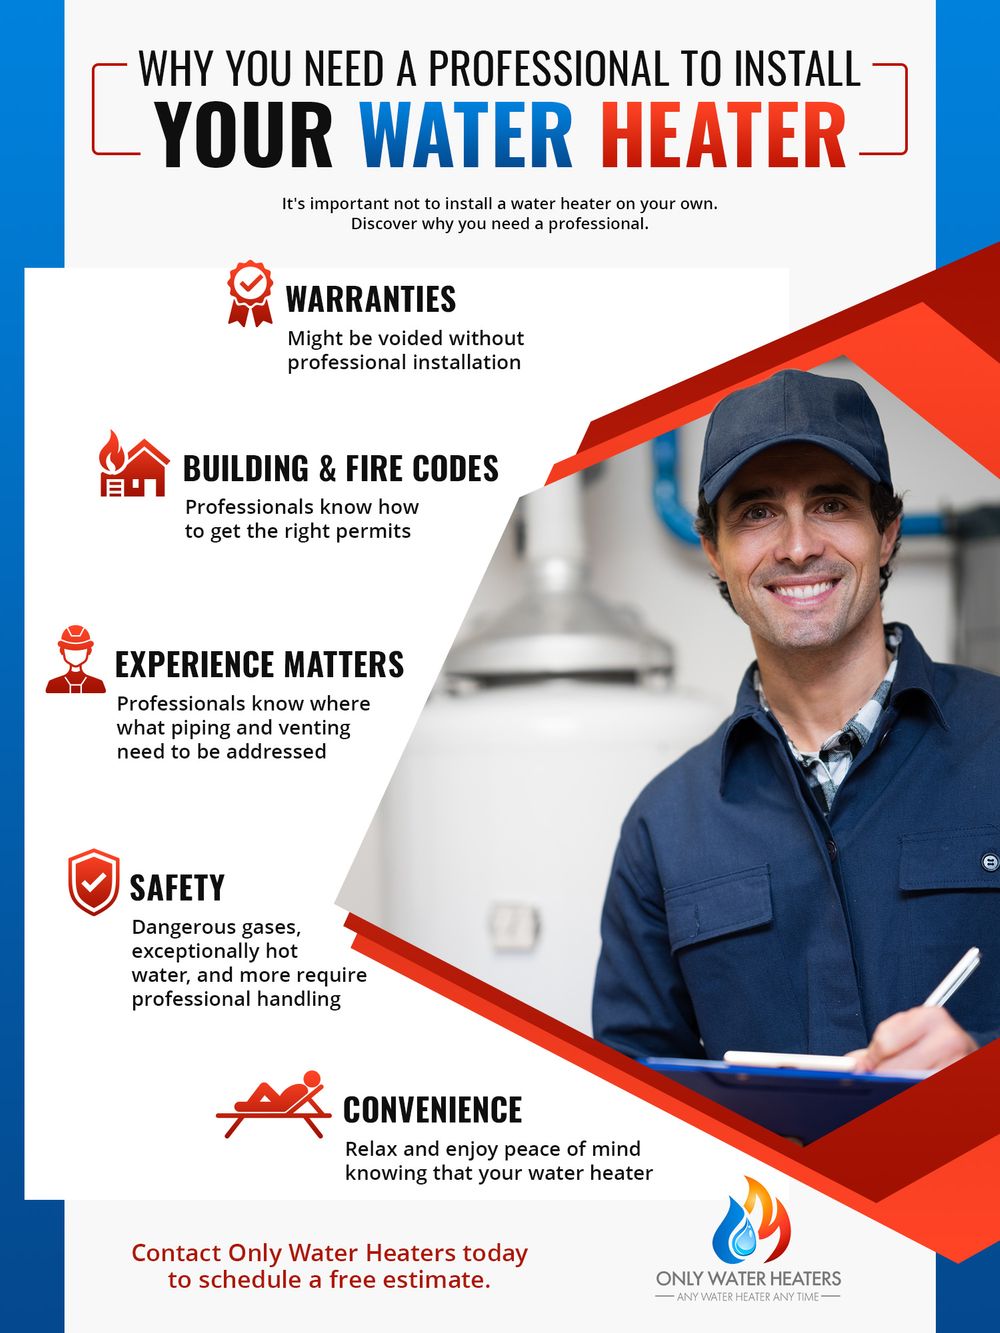 Why-You-Need-a-Professional-to-Install-Your-Water-Heater-infographic-6099bc5c58364.jpg